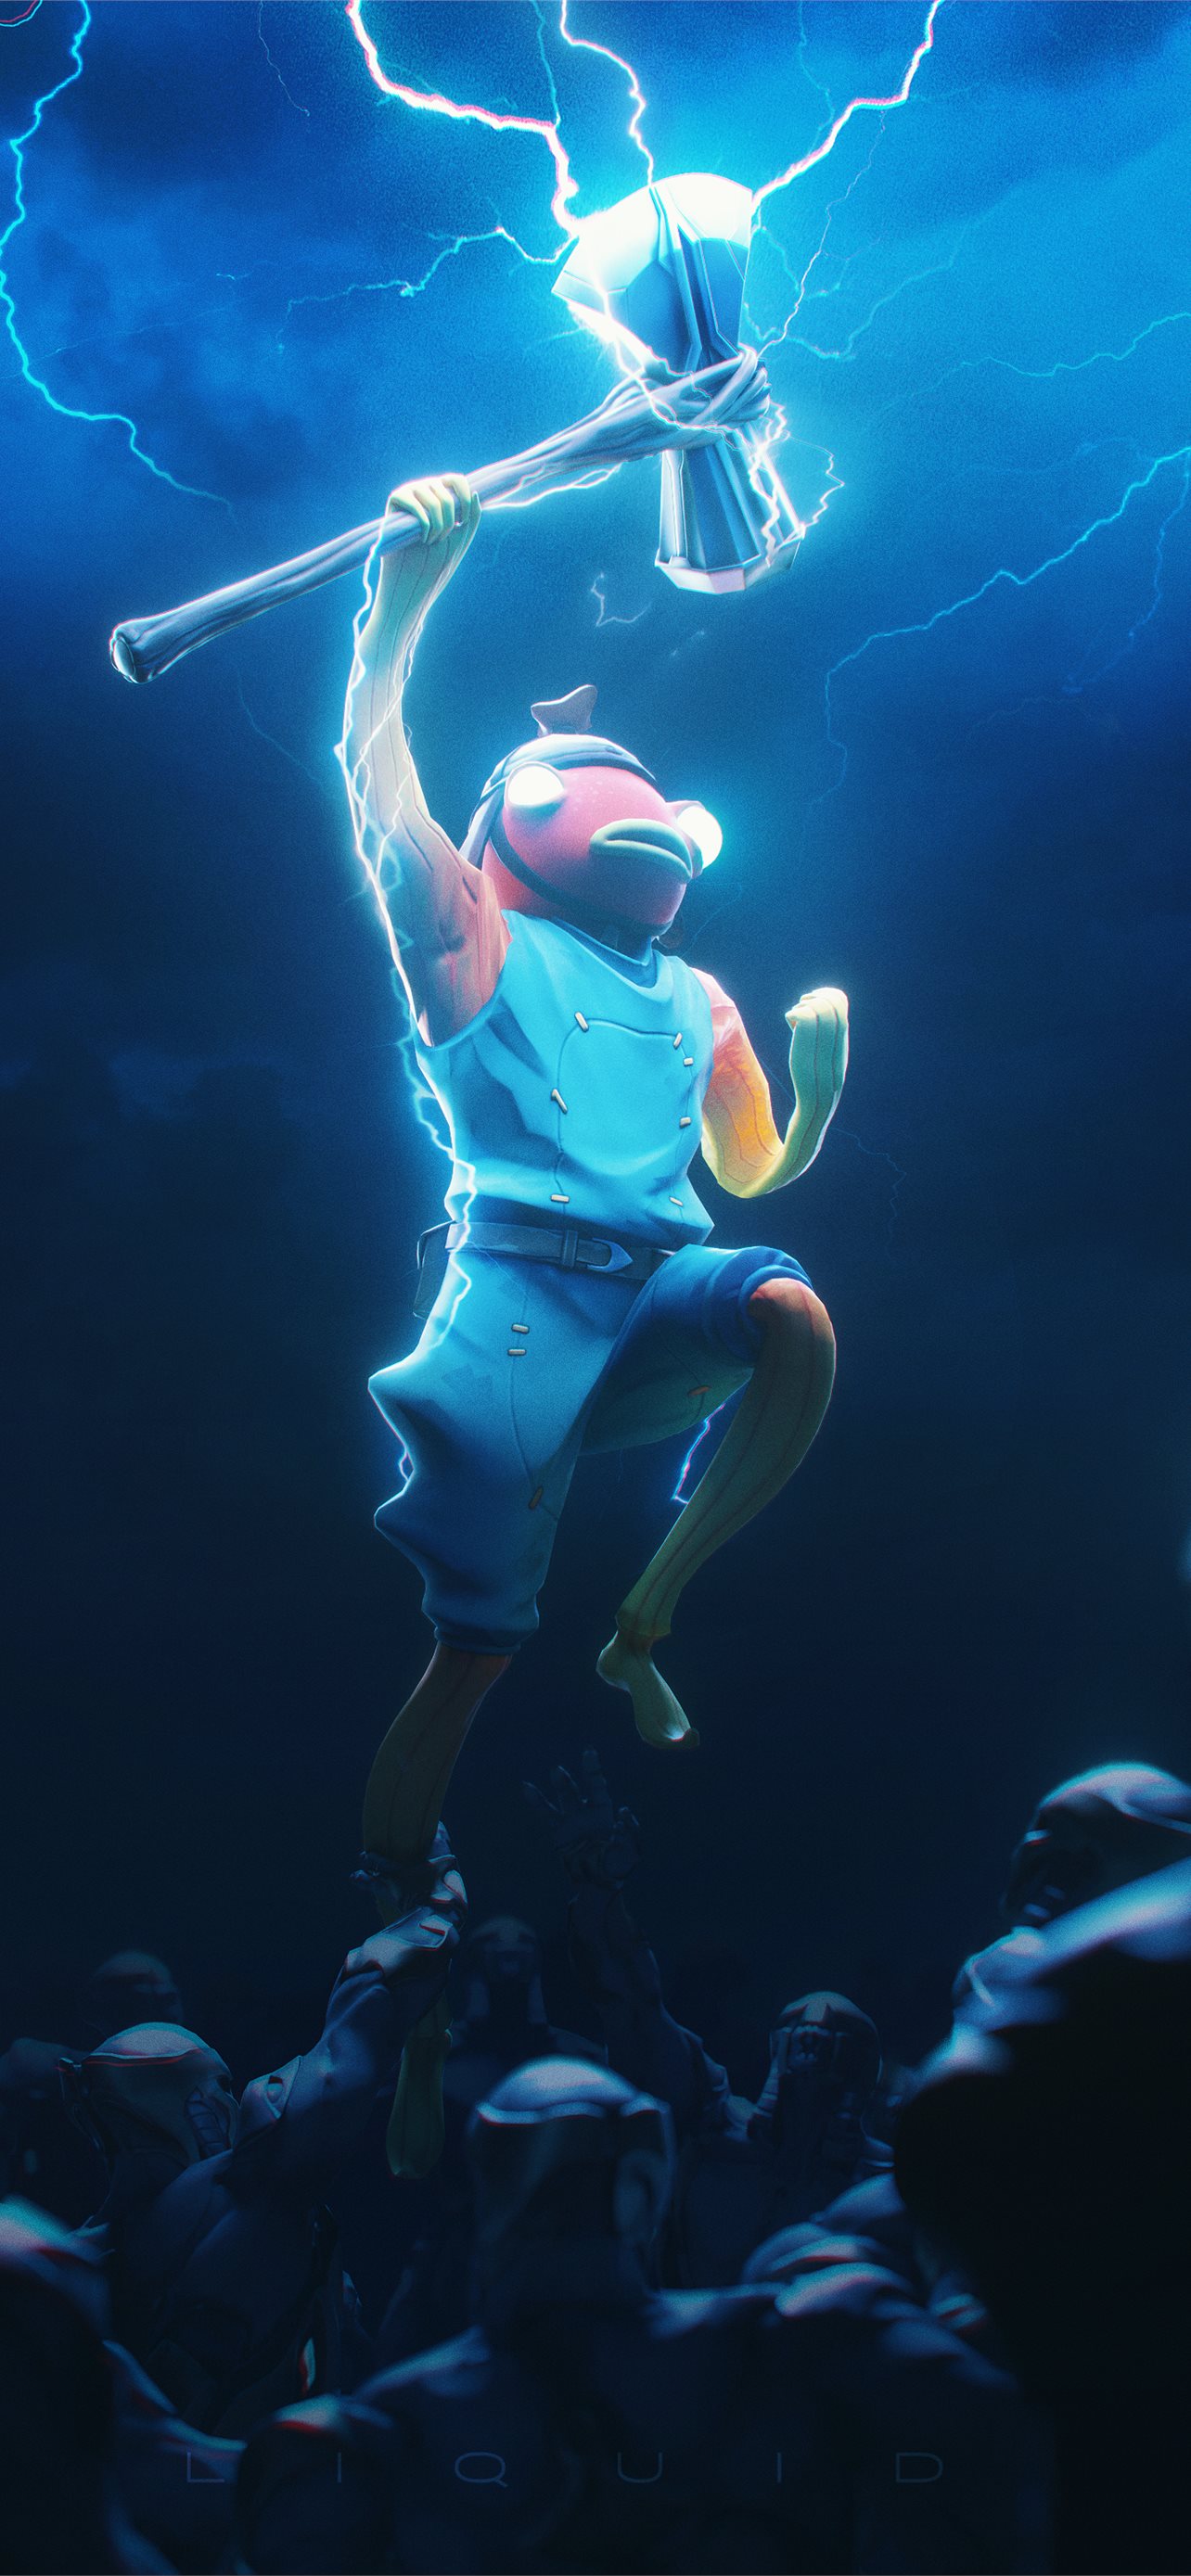 49 Fishstick ideas  best gaming wallpapers gaming wallpapers fortnite